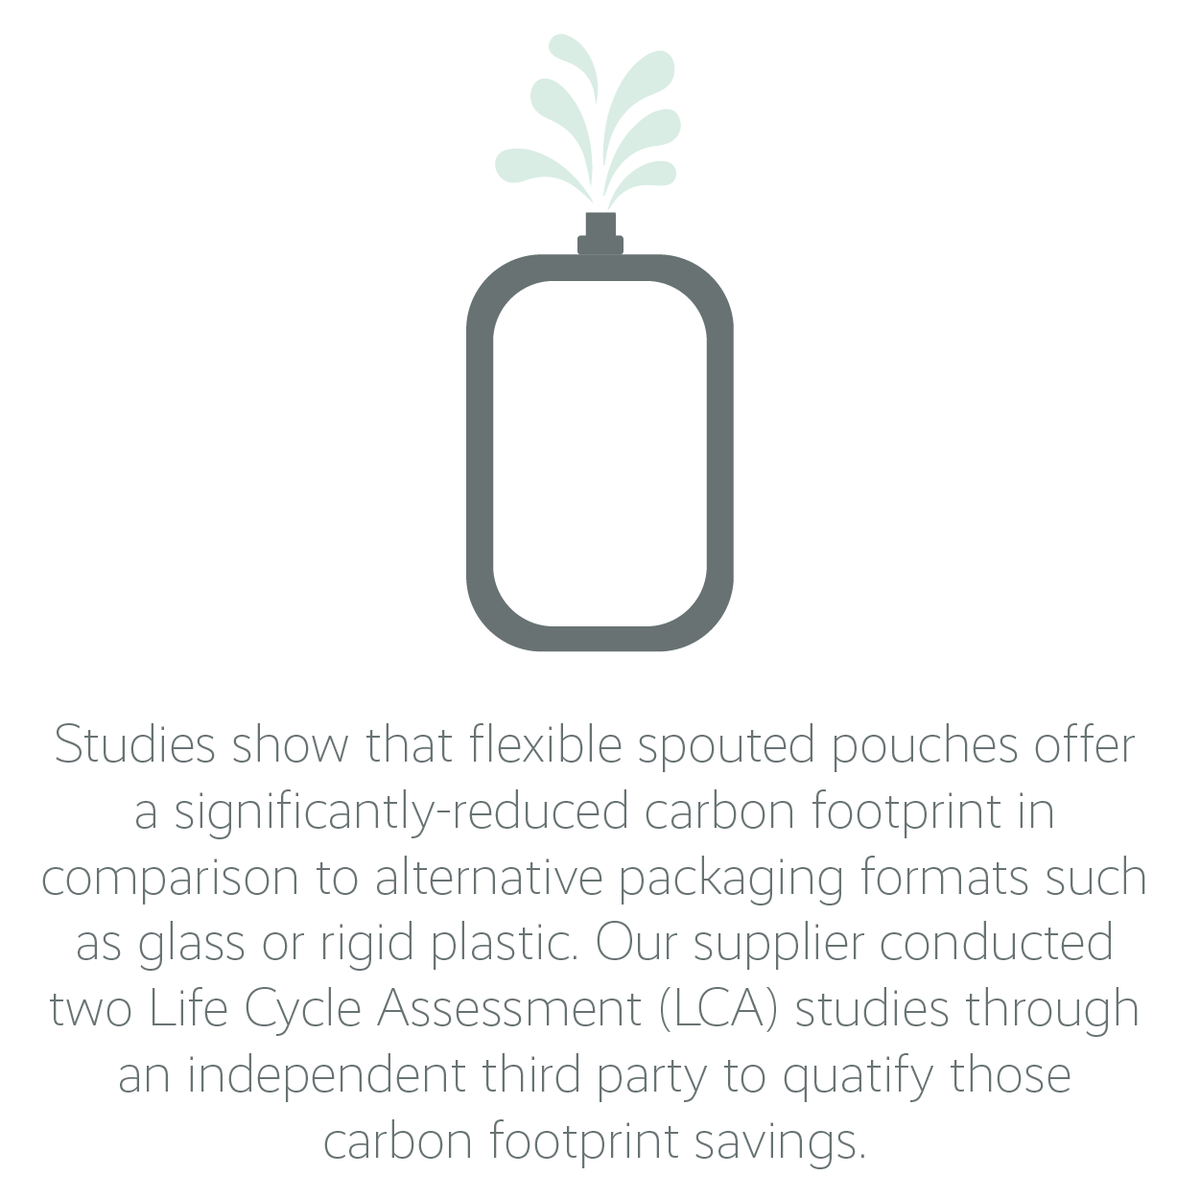 Studies show that flexible spouted pouches offer a significantly-reduced carbon footprint